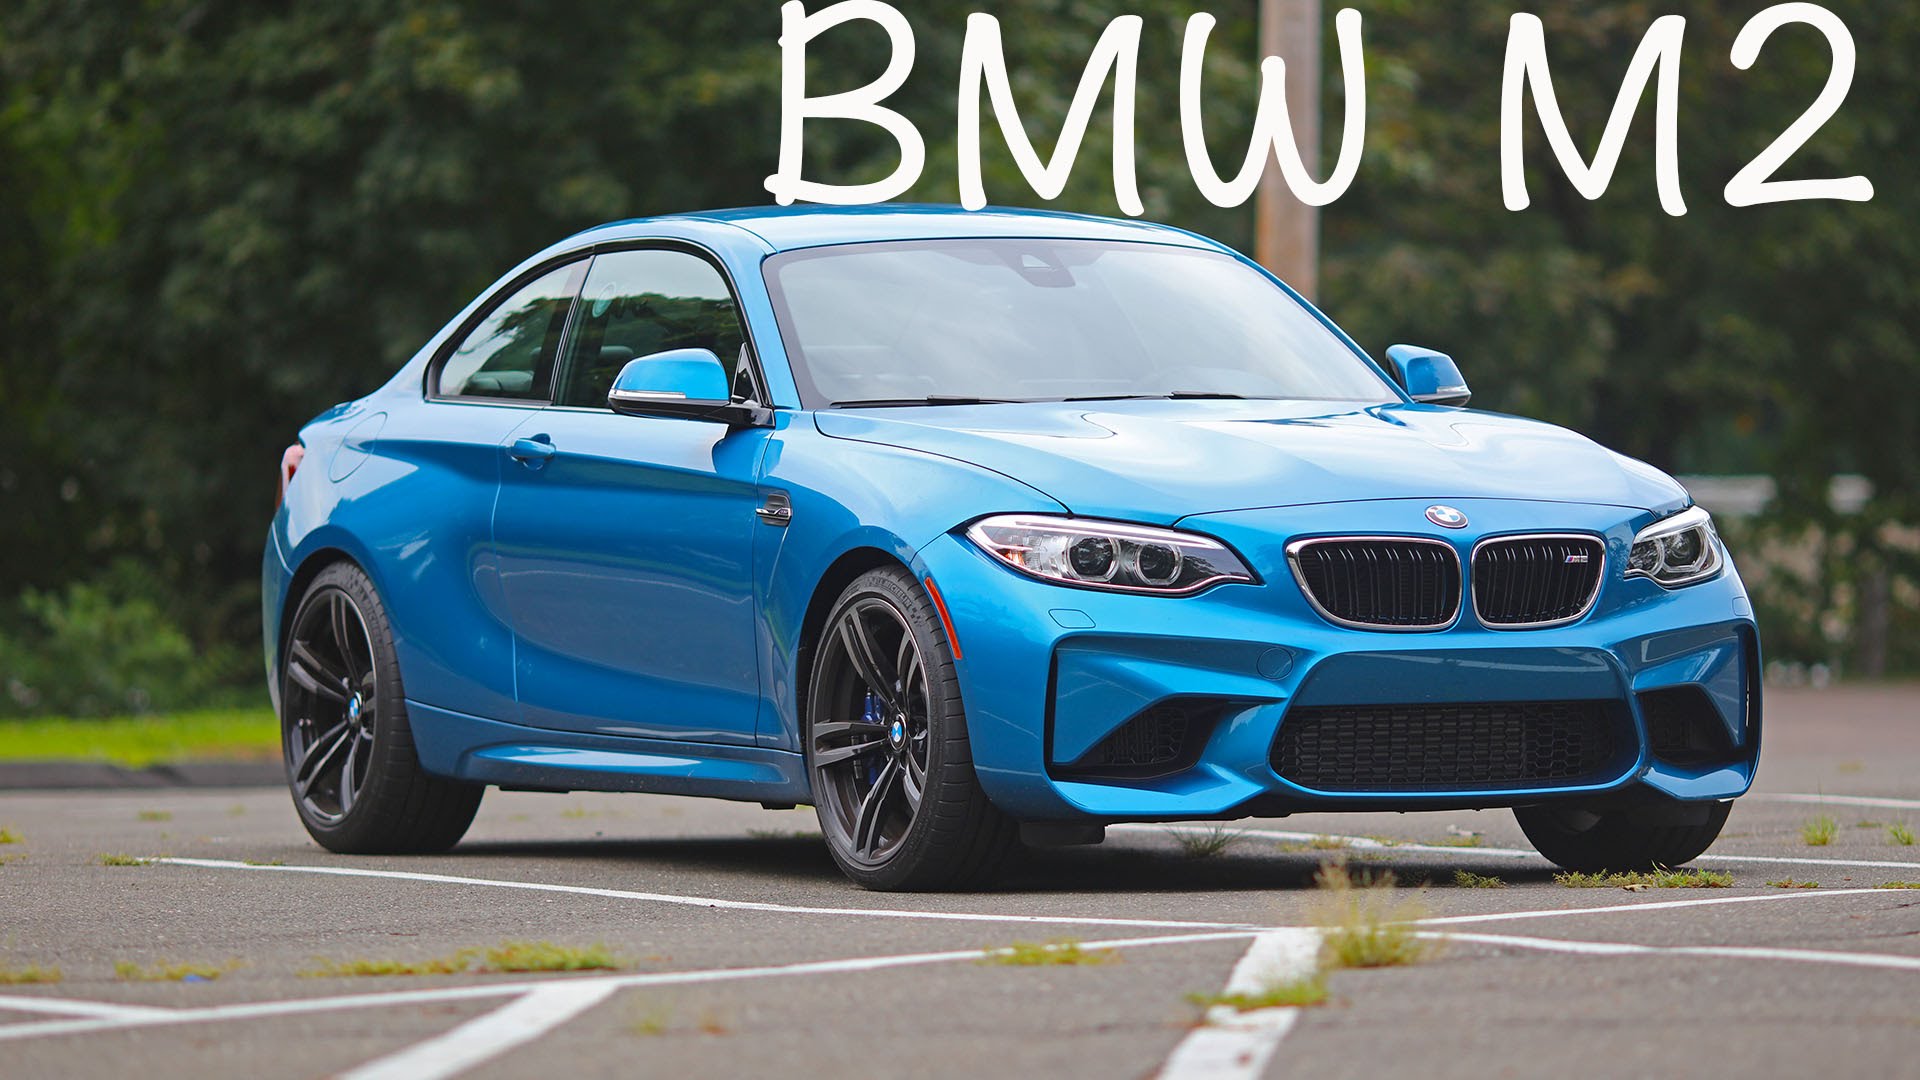 BMW M2 Coupe Backgrounds on Wallpapers Vista